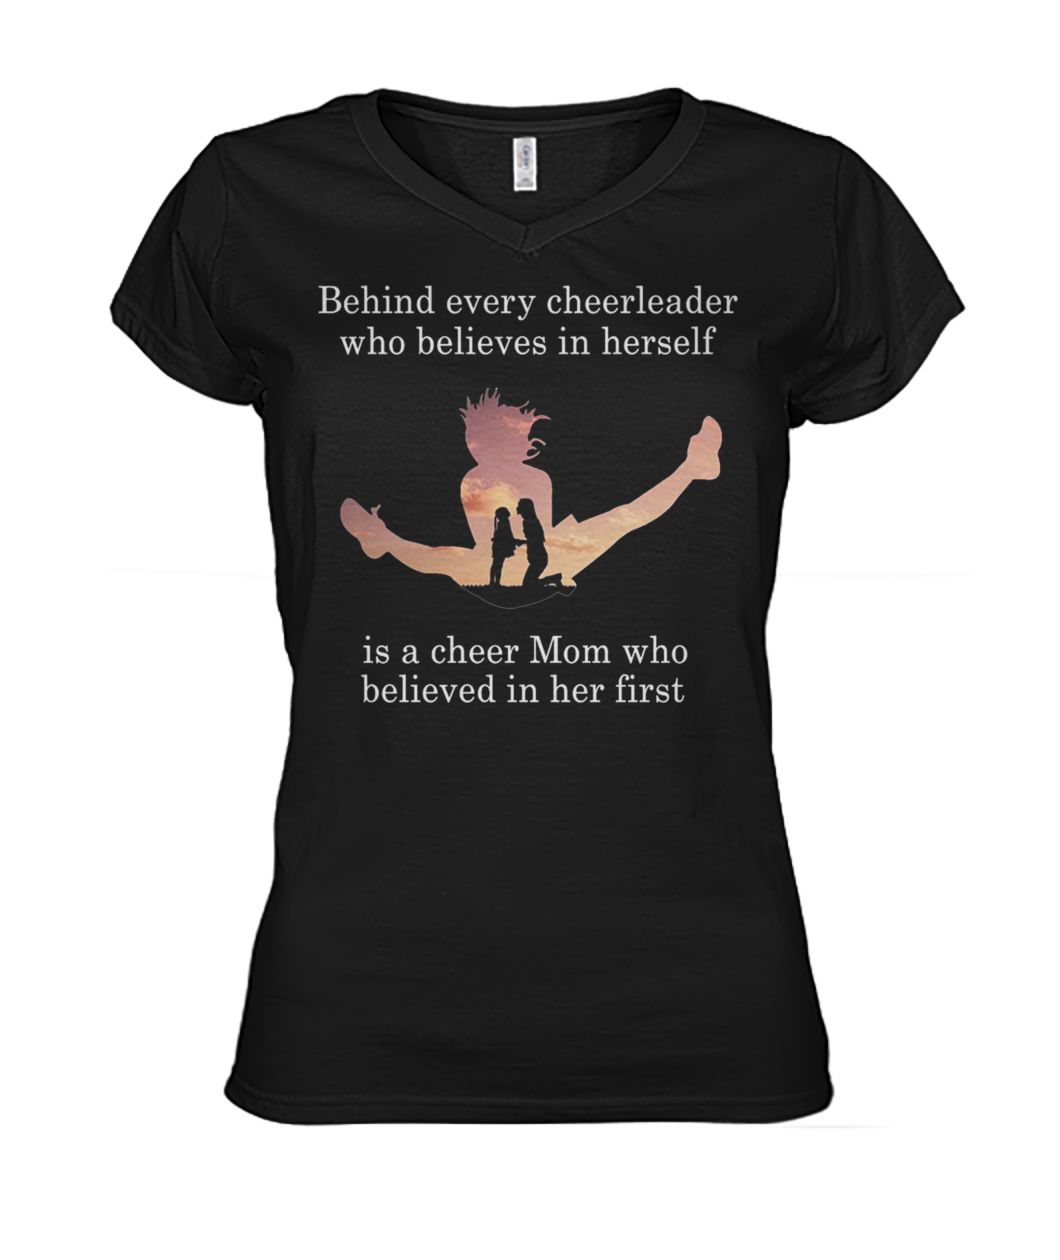 Behind every cheerleader who believes in herself is a cheer mom who believed in her first women's v-neck